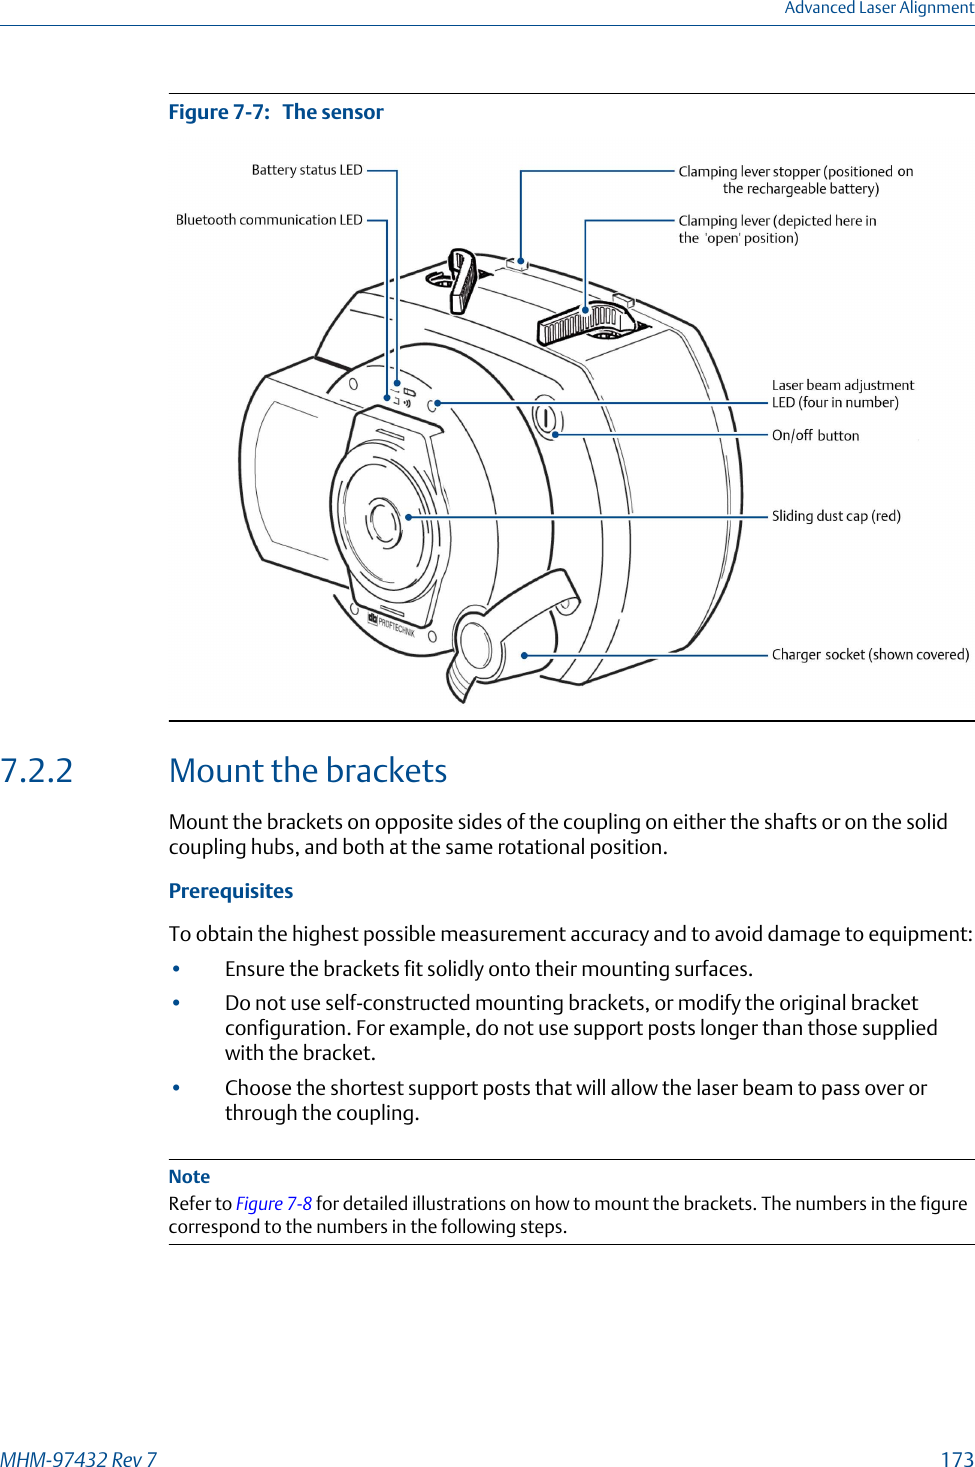 The sensorFigure 7-7:   7.2.2 Mount the bracketsMount the brackets on opposite sides of the coupling on either the shafts or on the solidcoupling hubs, and both at the same rotational position.PrerequisitesTo obtain the highest possible measurement accuracy and to avoid damage to equipment:•Ensure the brackets fit solidly onto their mounting surfaces.•Do not use self-constructed mounting brackets, or modify the original bracketconfiguration. For example, do not use support posts longer than those suppliedwith the bracket.•Choose the shortest support posts that will allow the laser beam to pass over orthrough the coupling.NoteRefer to Figure 7-8 for detailed illustrations on how to mount the brackets. The numbers in the figurecorrespond to the numbers in the following steps.Advanced Laser AlignmentMHM-97432 Rev 7  173